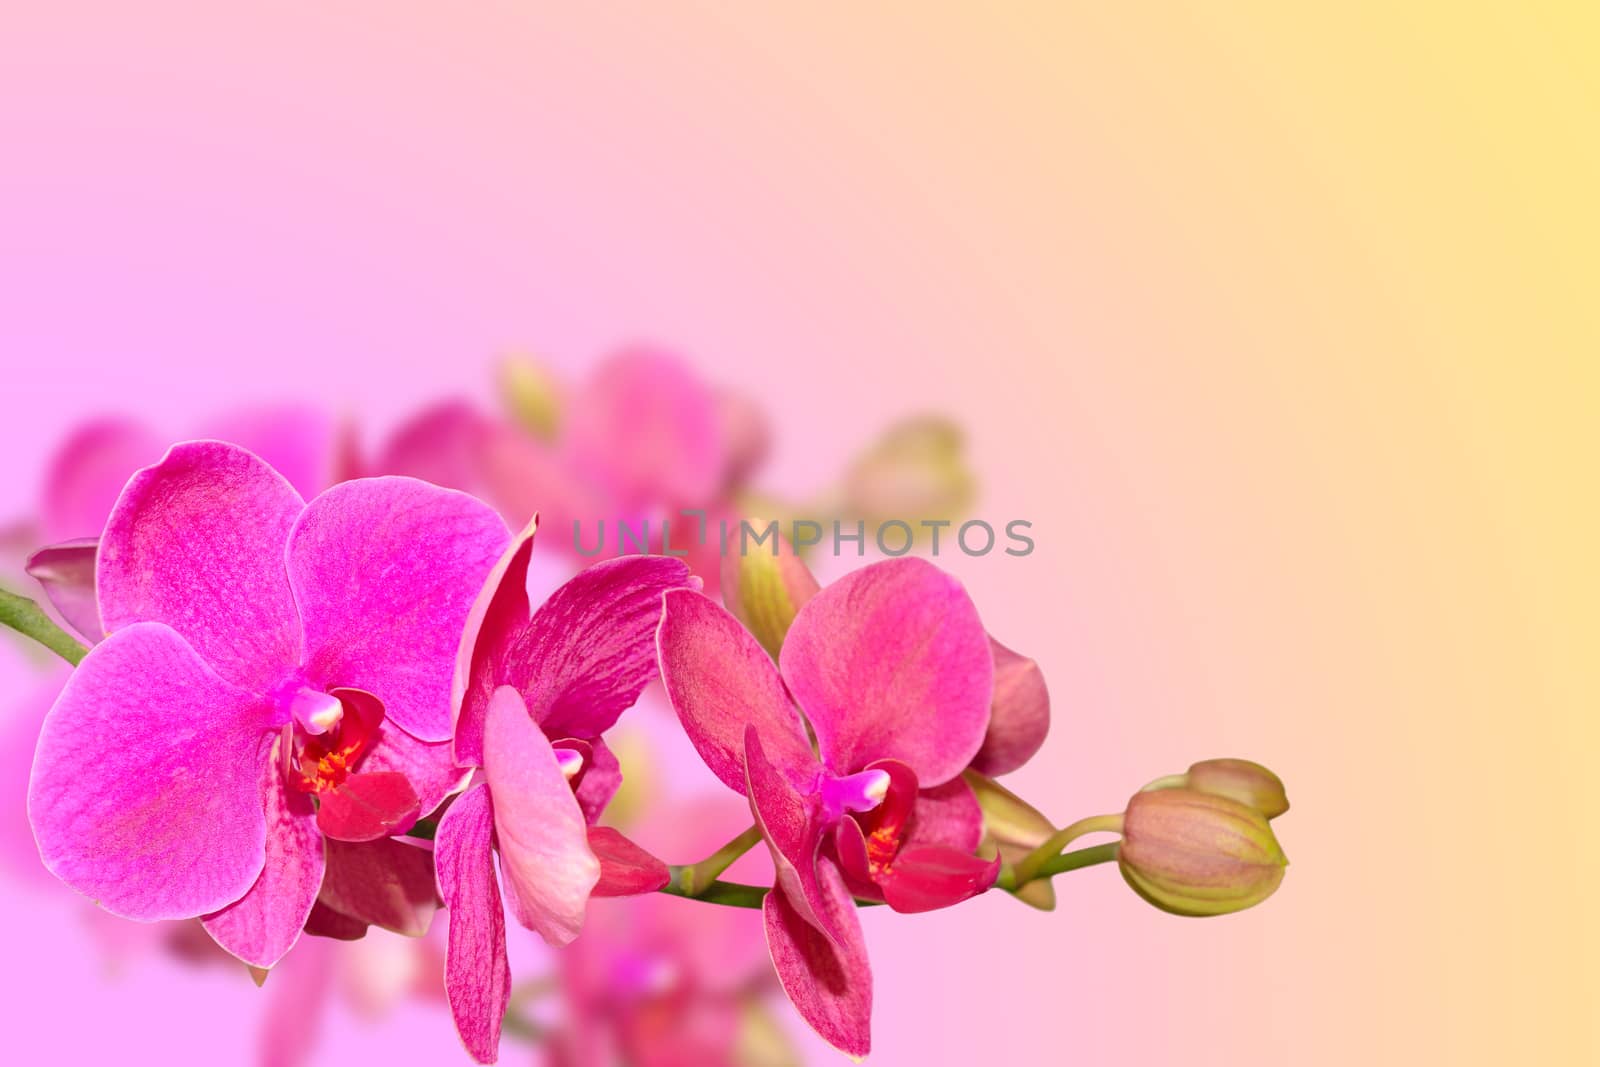 Purple orchid flowers branch on blurred gradient with copyspace for your text